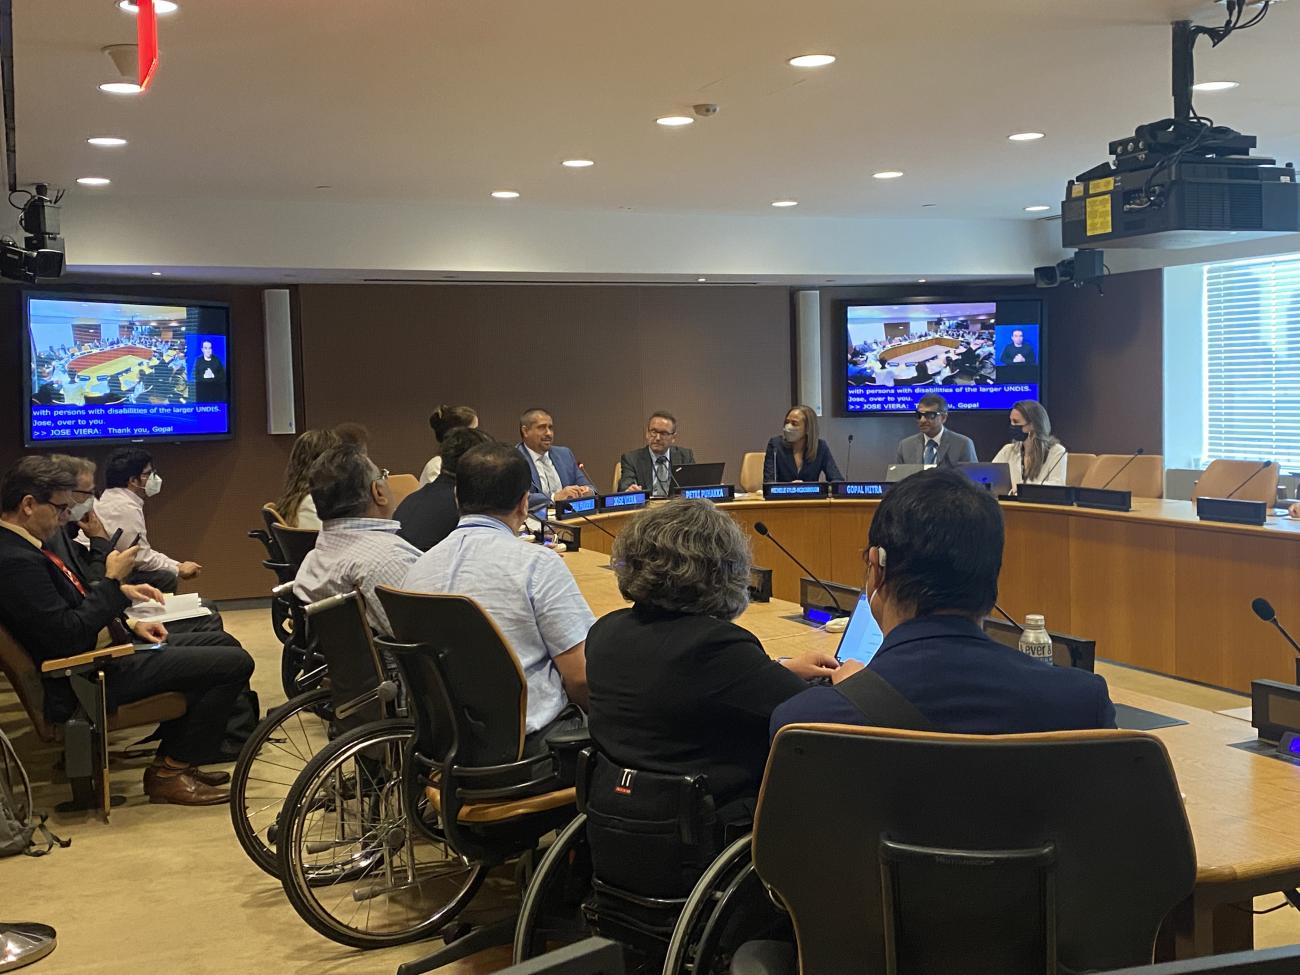 Panelists discuss implementation of the UN Disability Inclusion Strategy at the COSP Side Event in New York on 14 June.